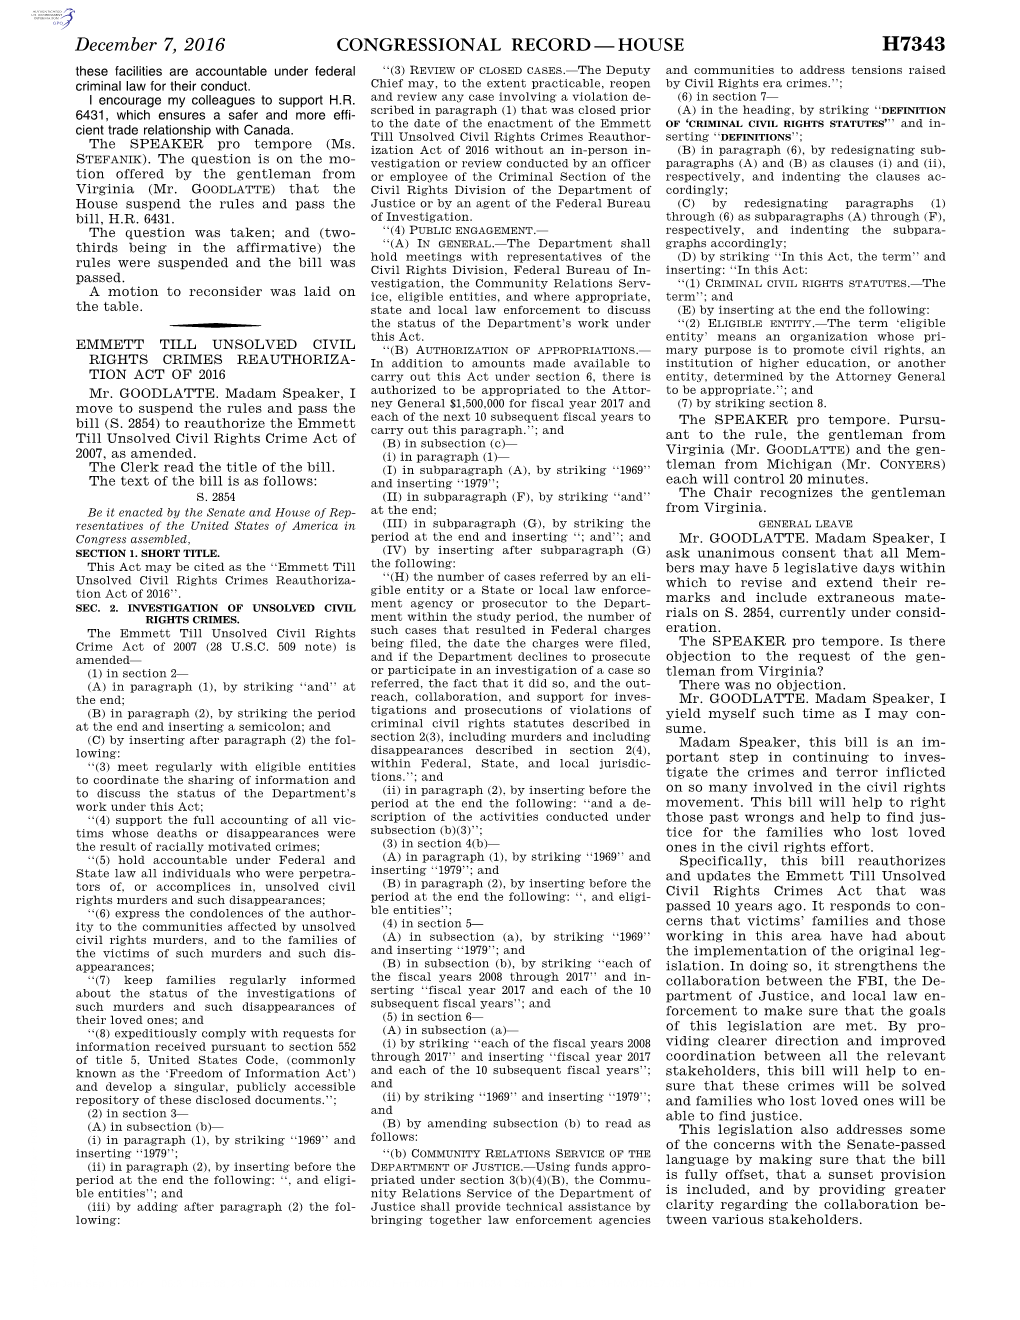 Congressional Record—House H7343